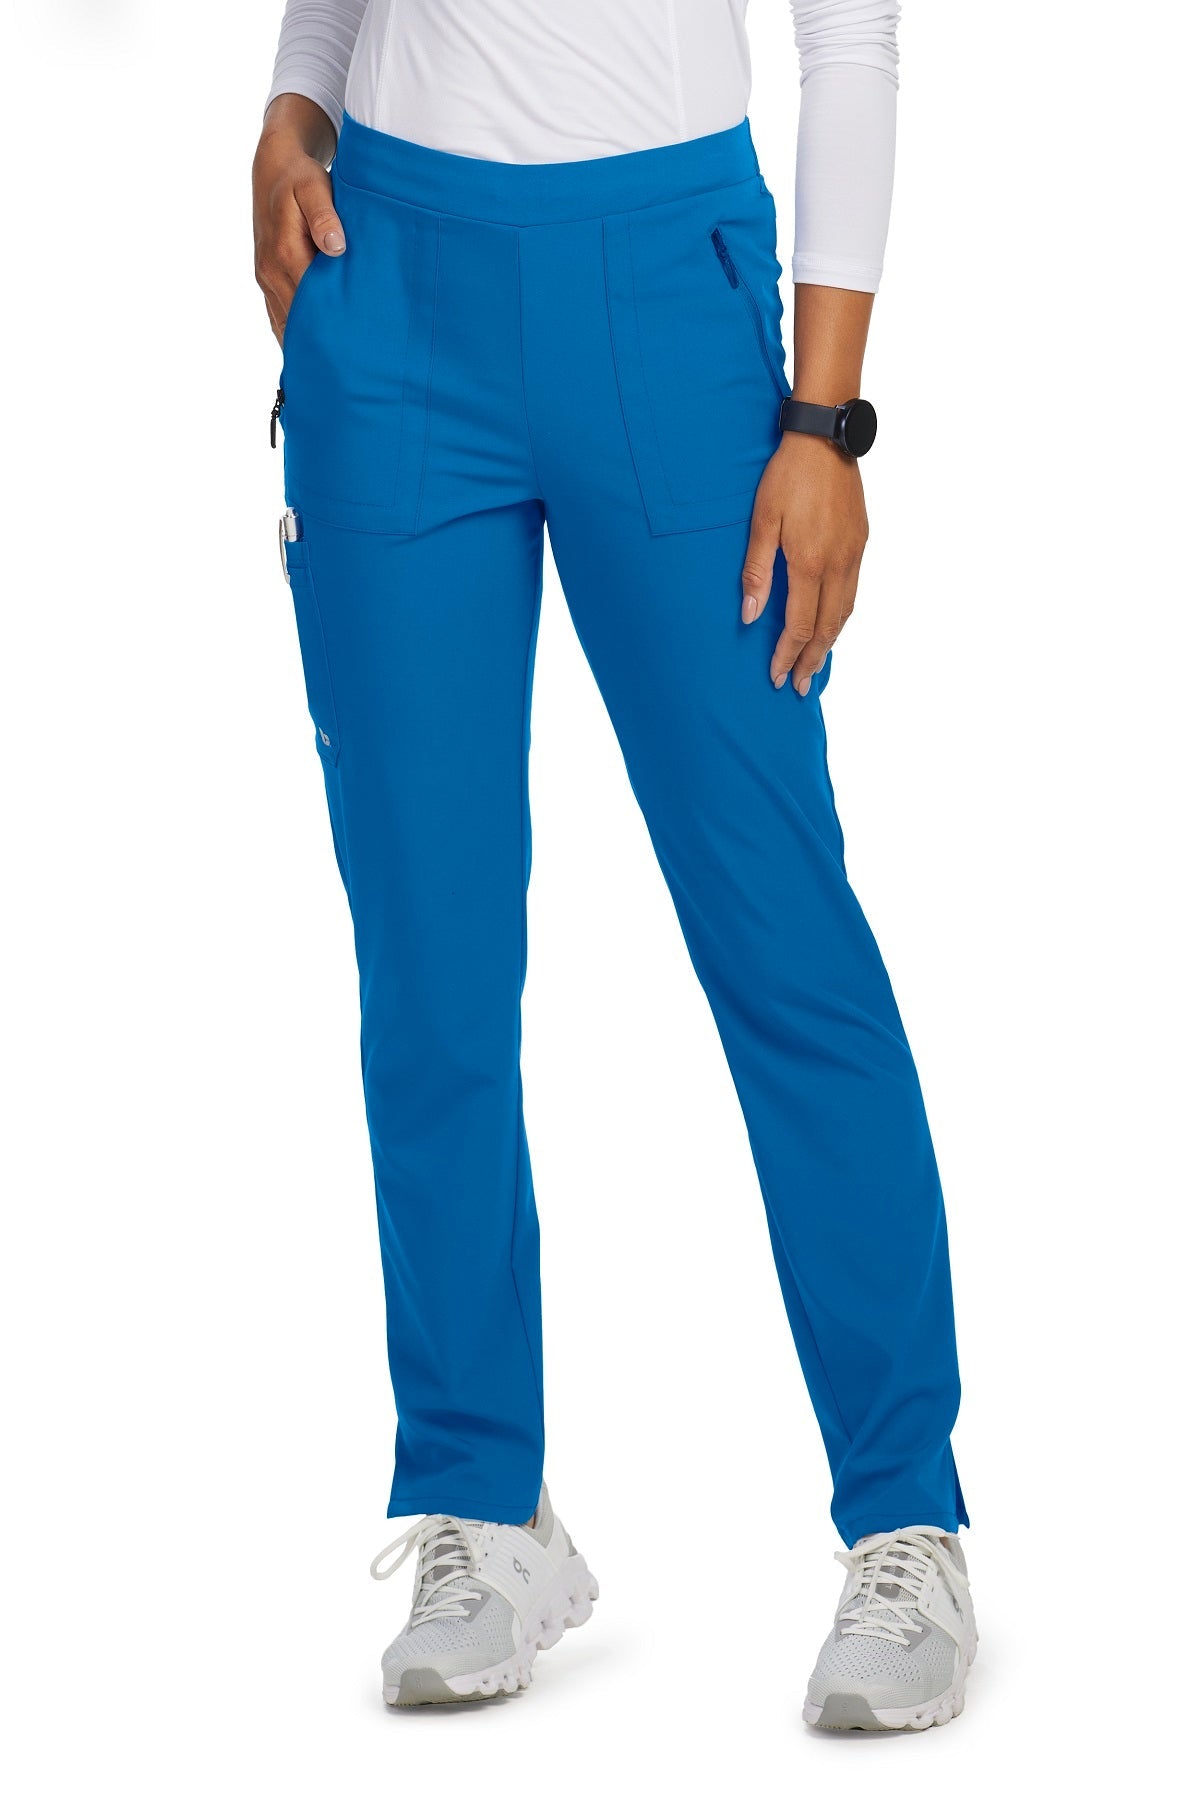 Barco Unify Petite Scrub Pants Purpose 5 Pocket in New Royal at Parker's Clothing and Shoes.